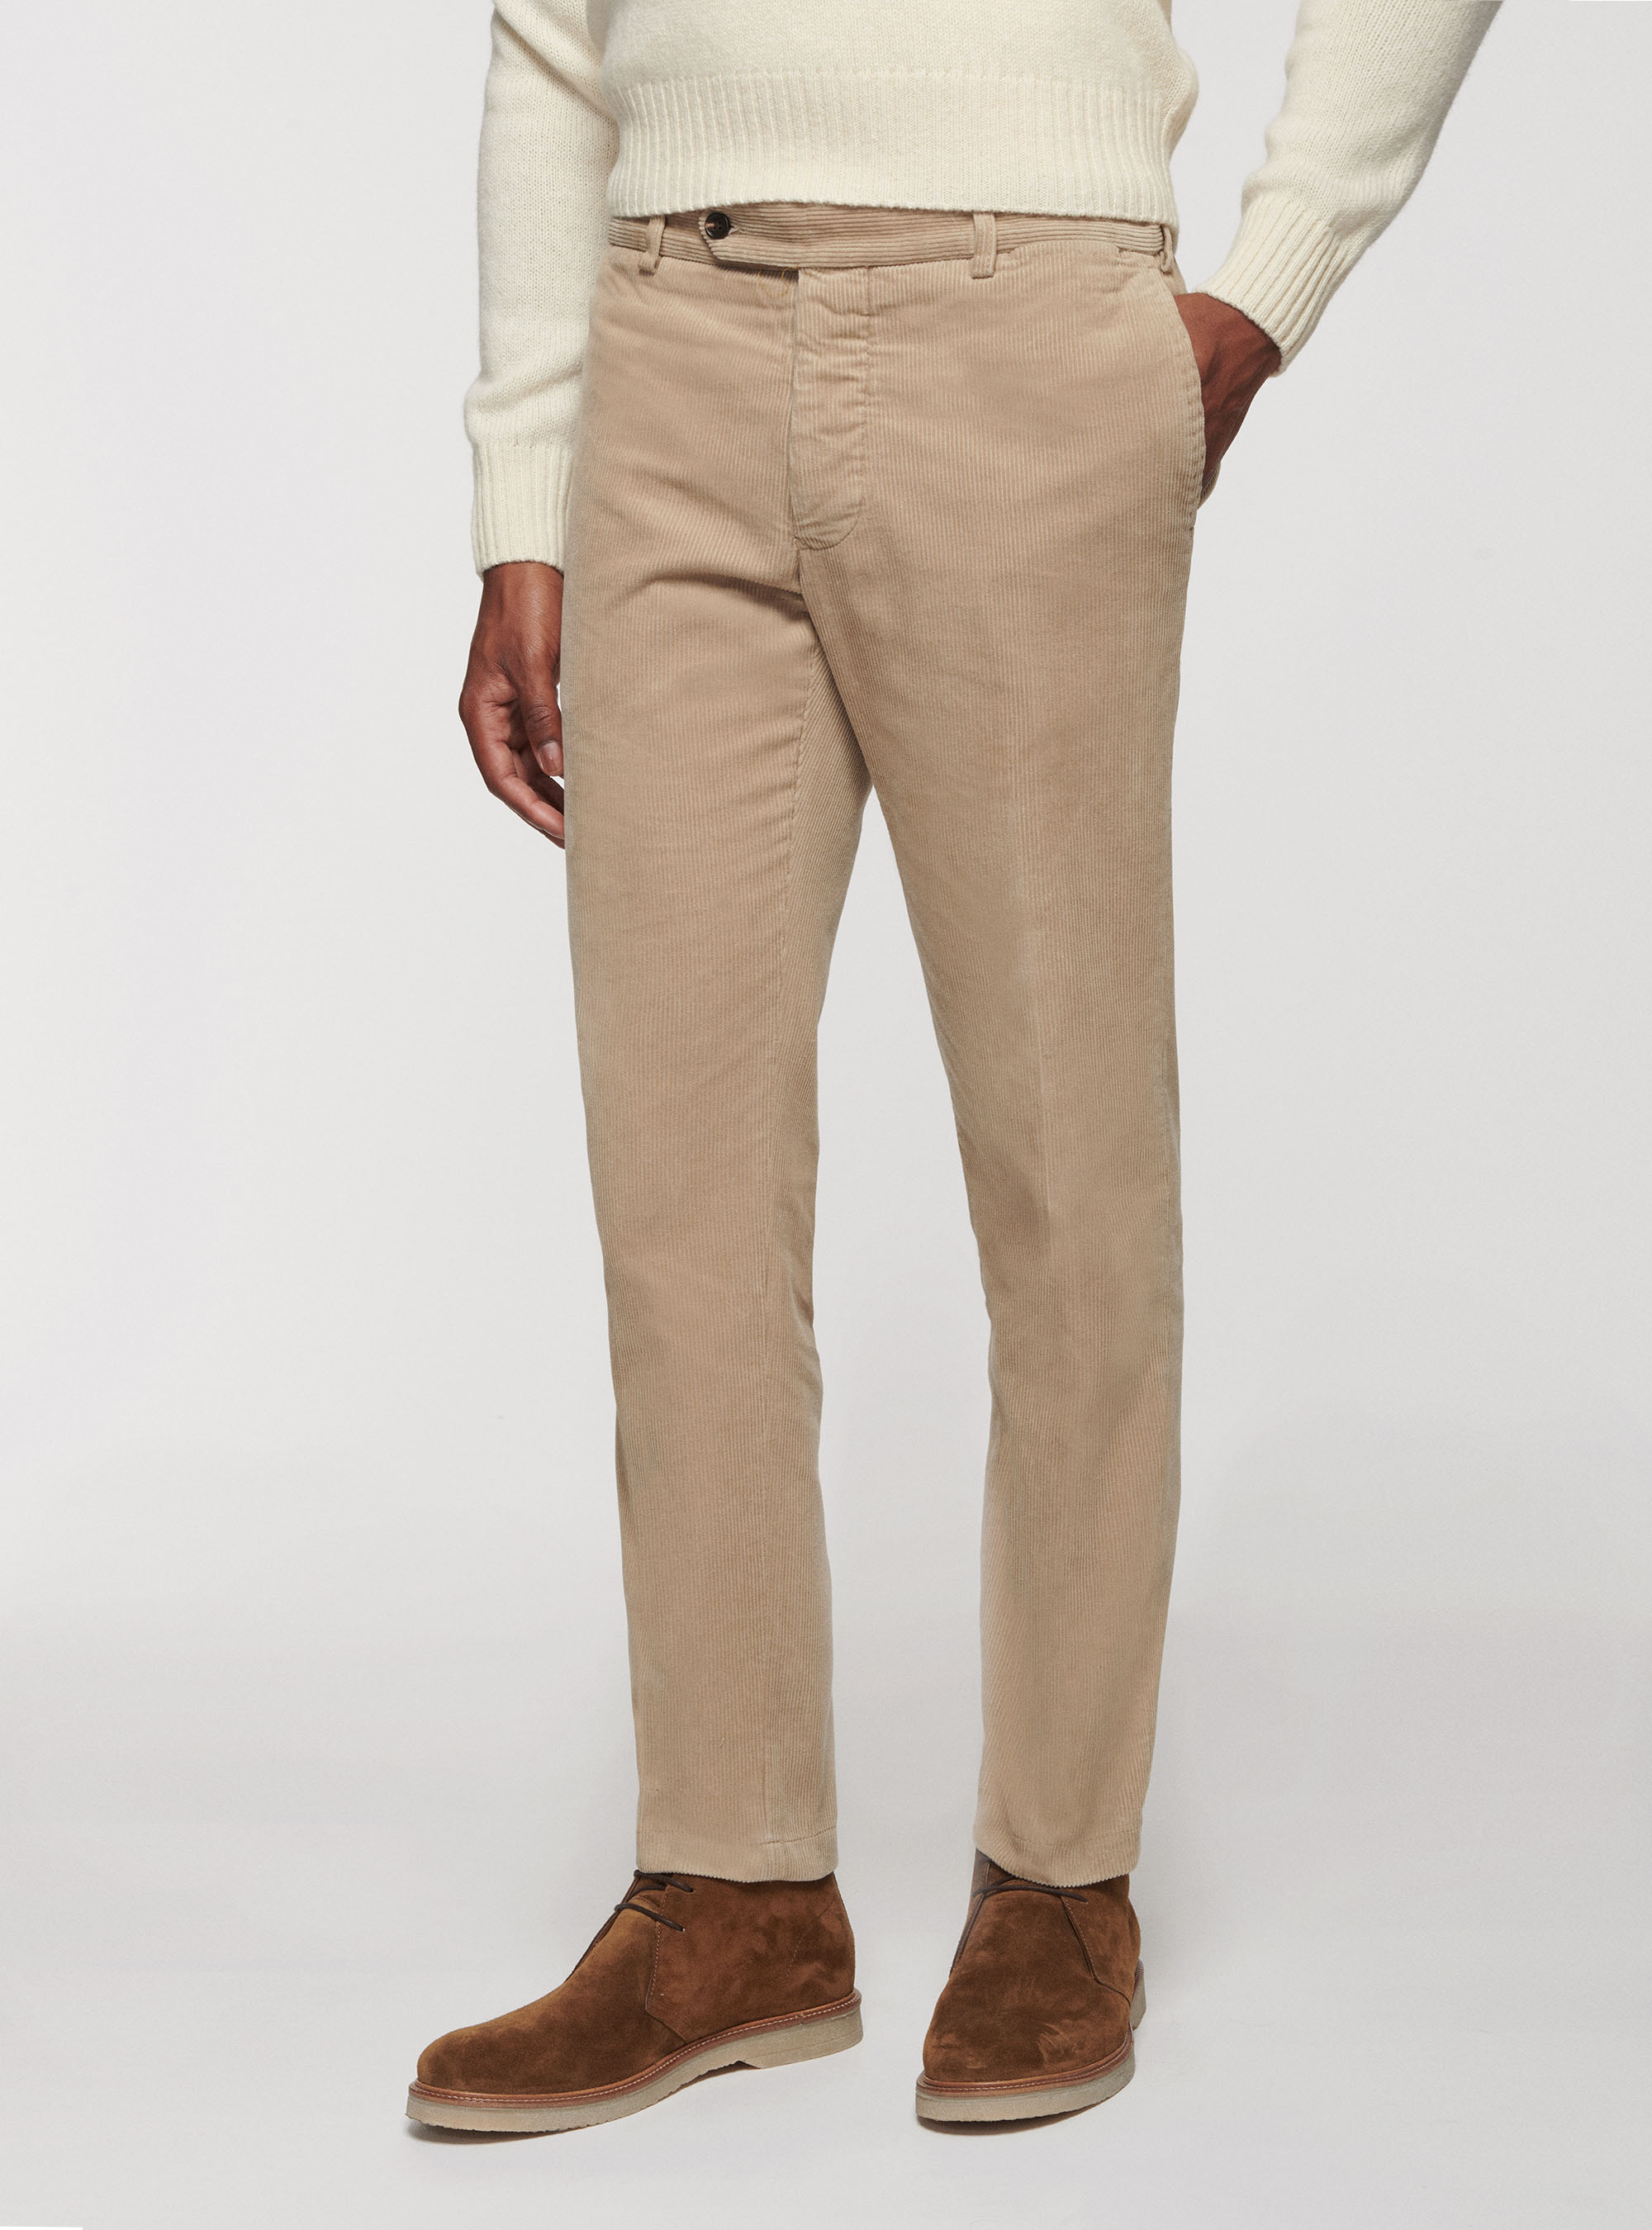 Emerald Green Flat Front Corduroy Trousers | Peter Christian